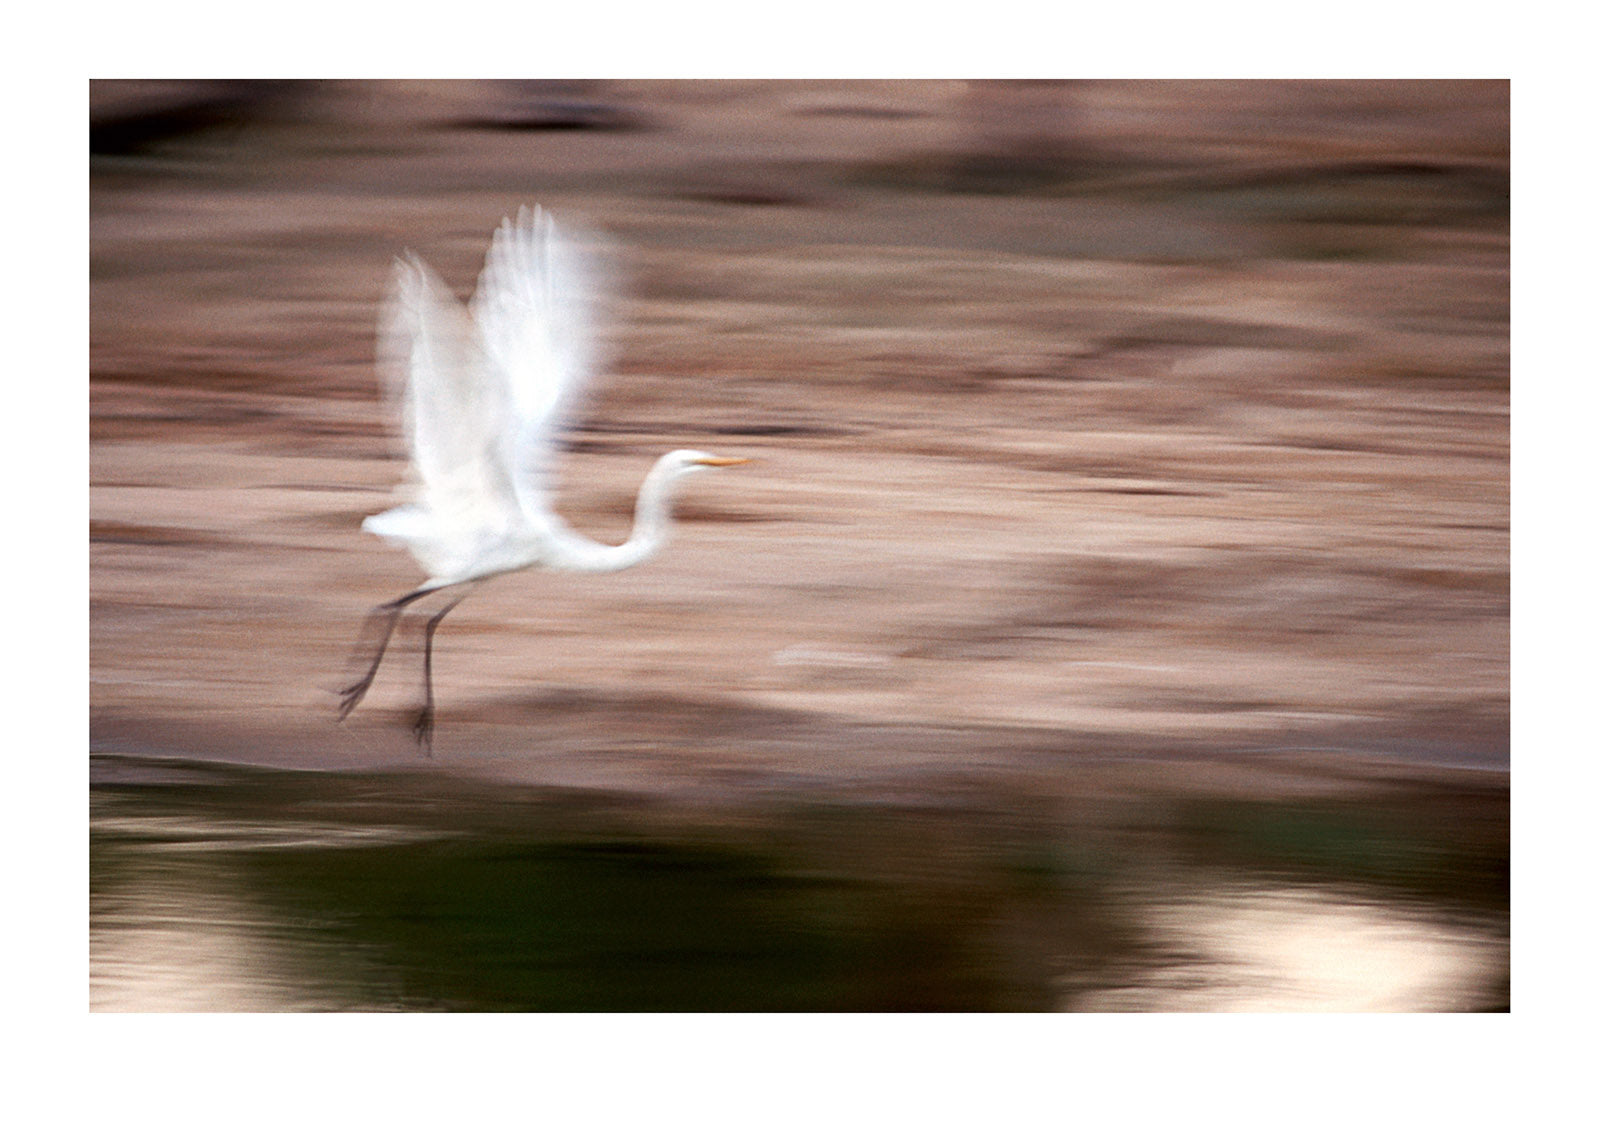 A Greater Egret sails between pre-dawn sand dunes in the Simpson Desert.